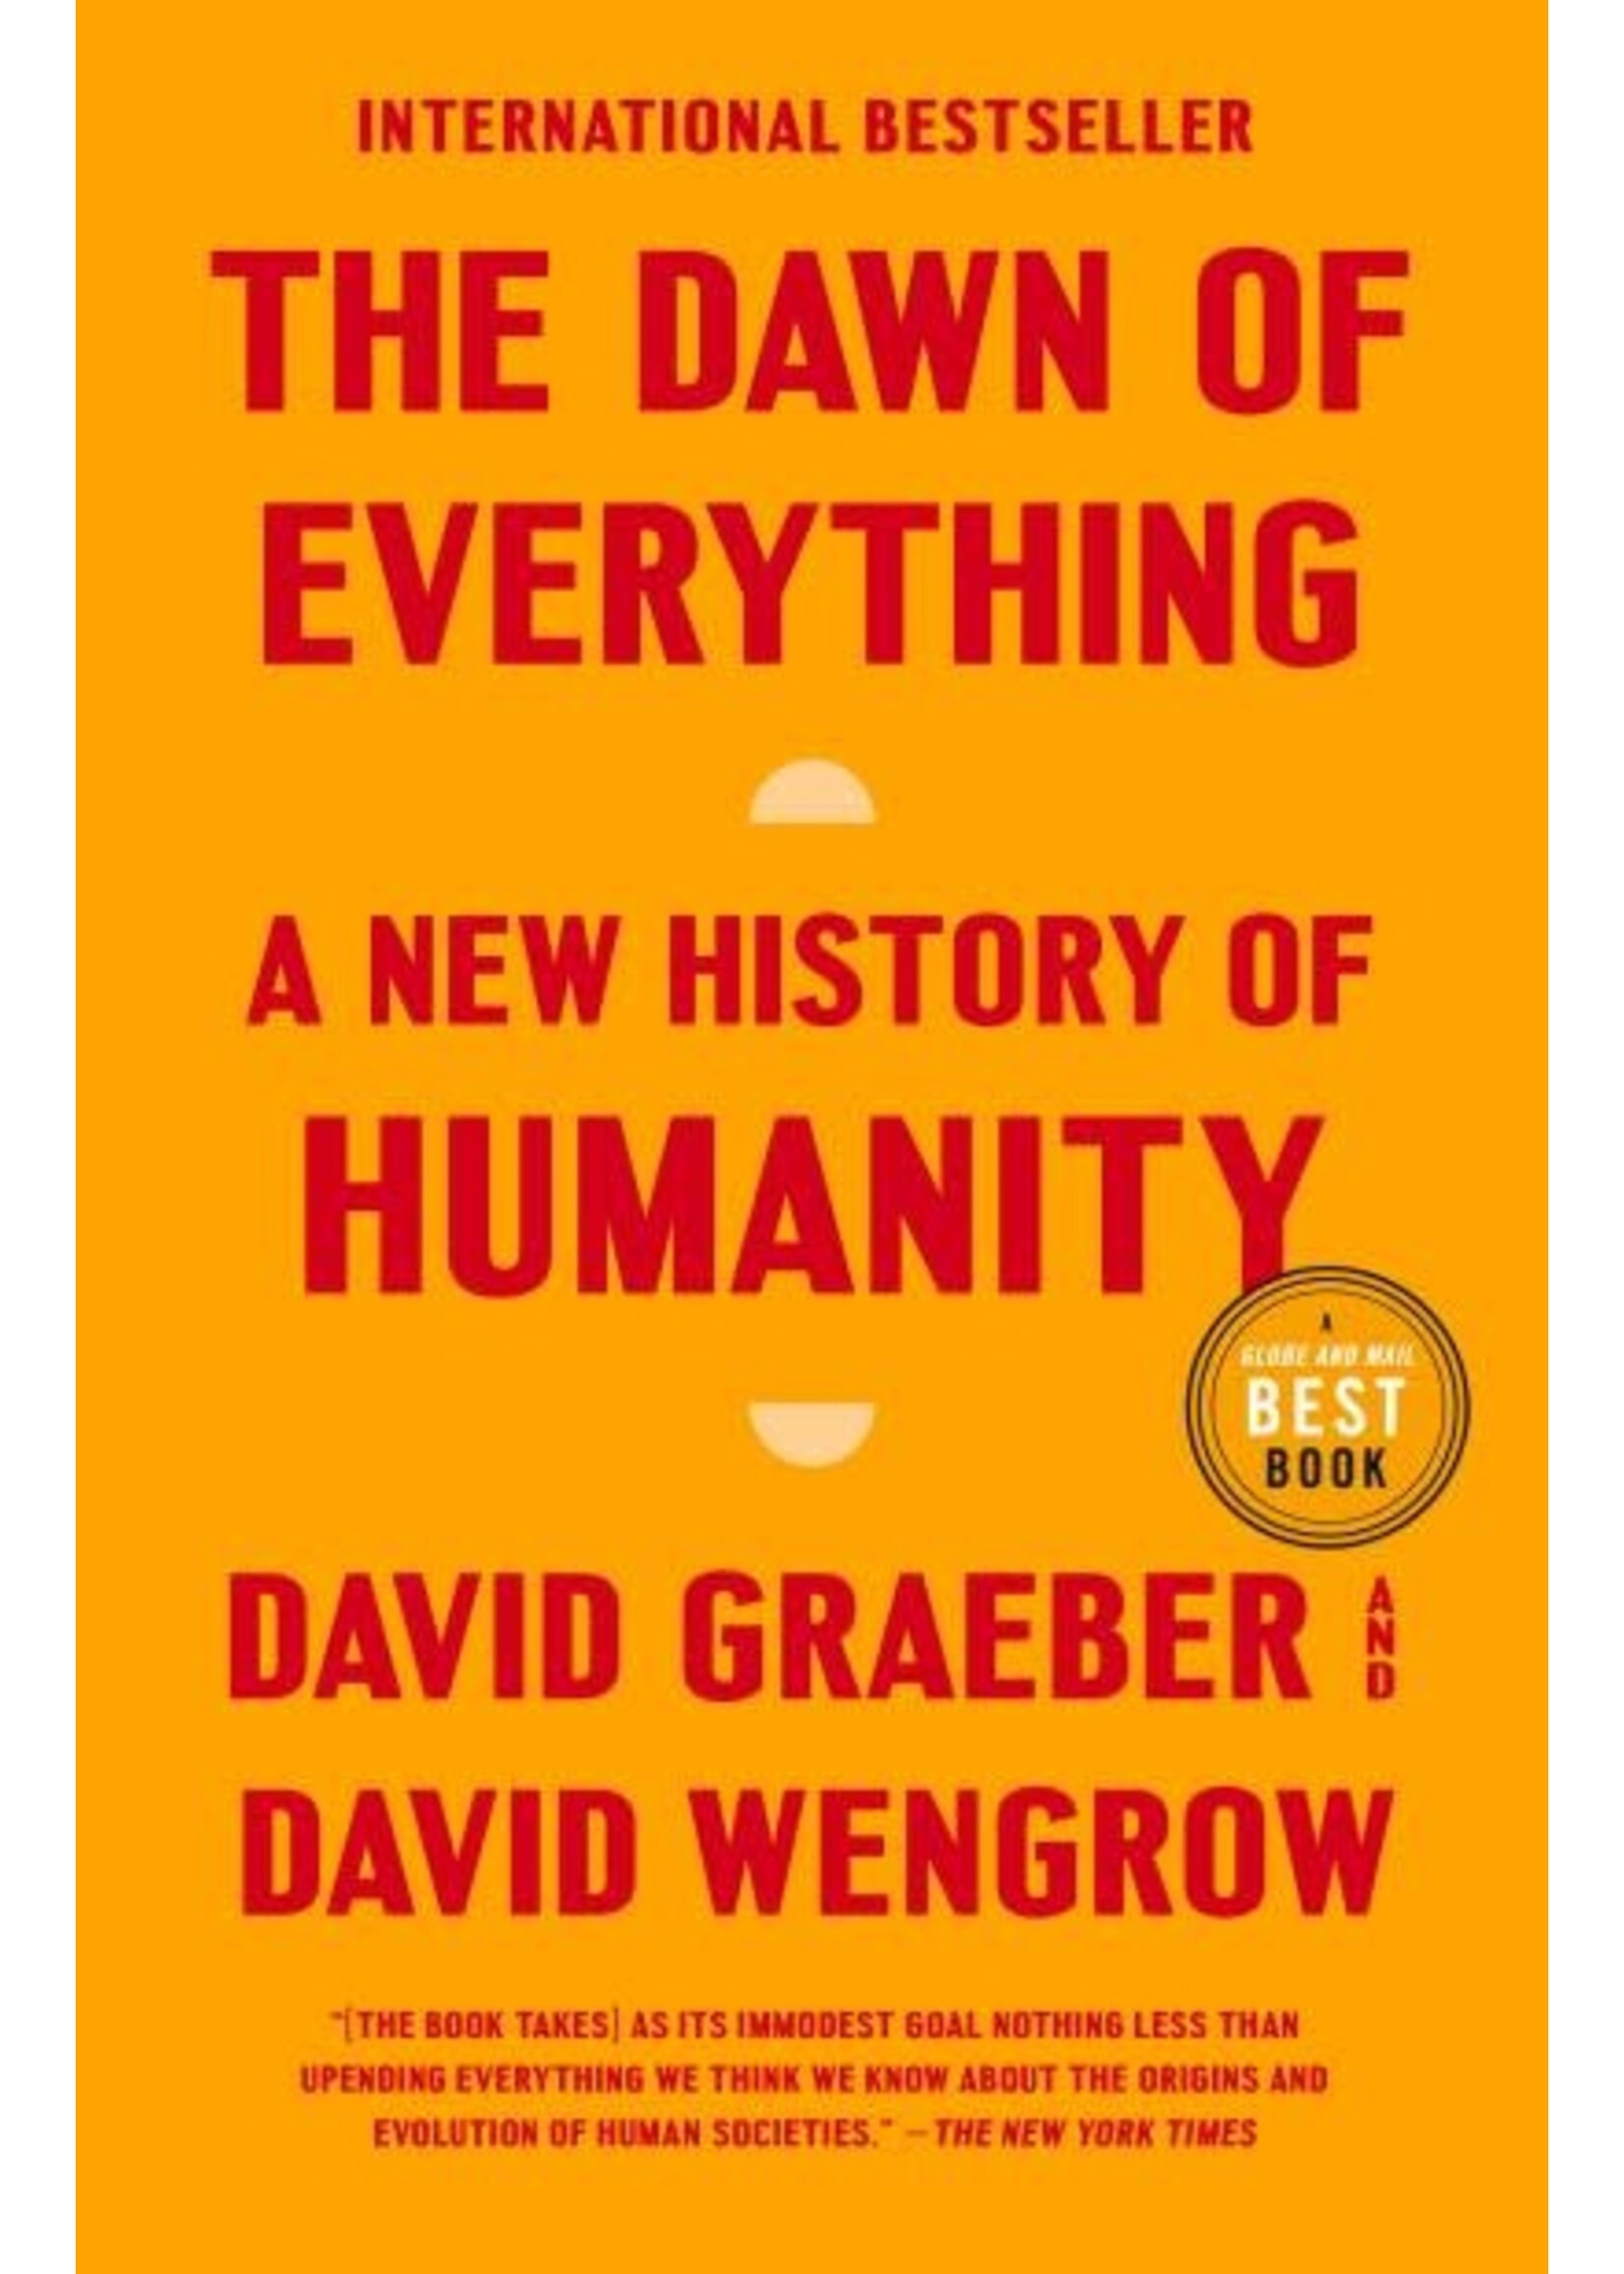 The Dawn of Everything: A New History of Humanity by David Graeber, David Wengrow